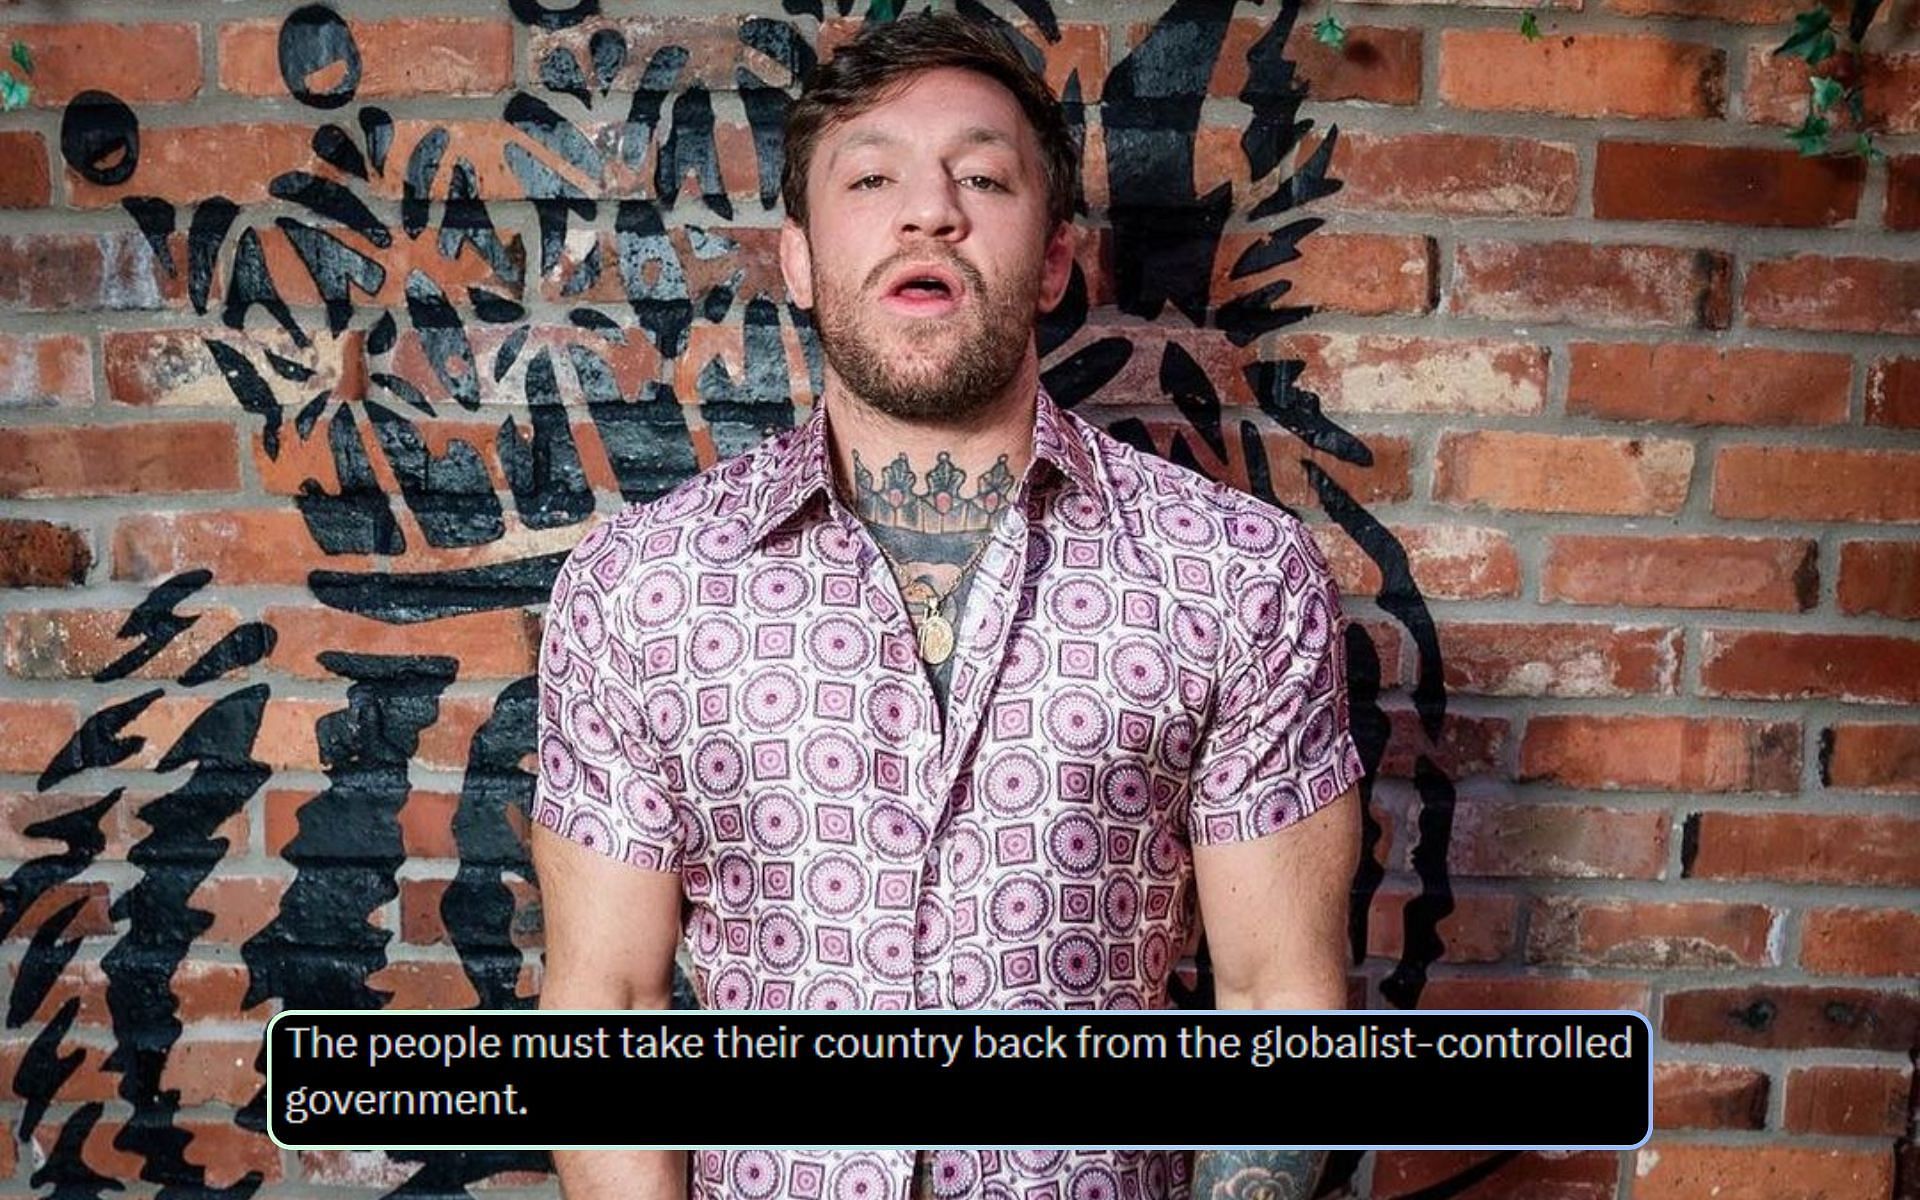 Conor McGregor is irritated by the Irish government